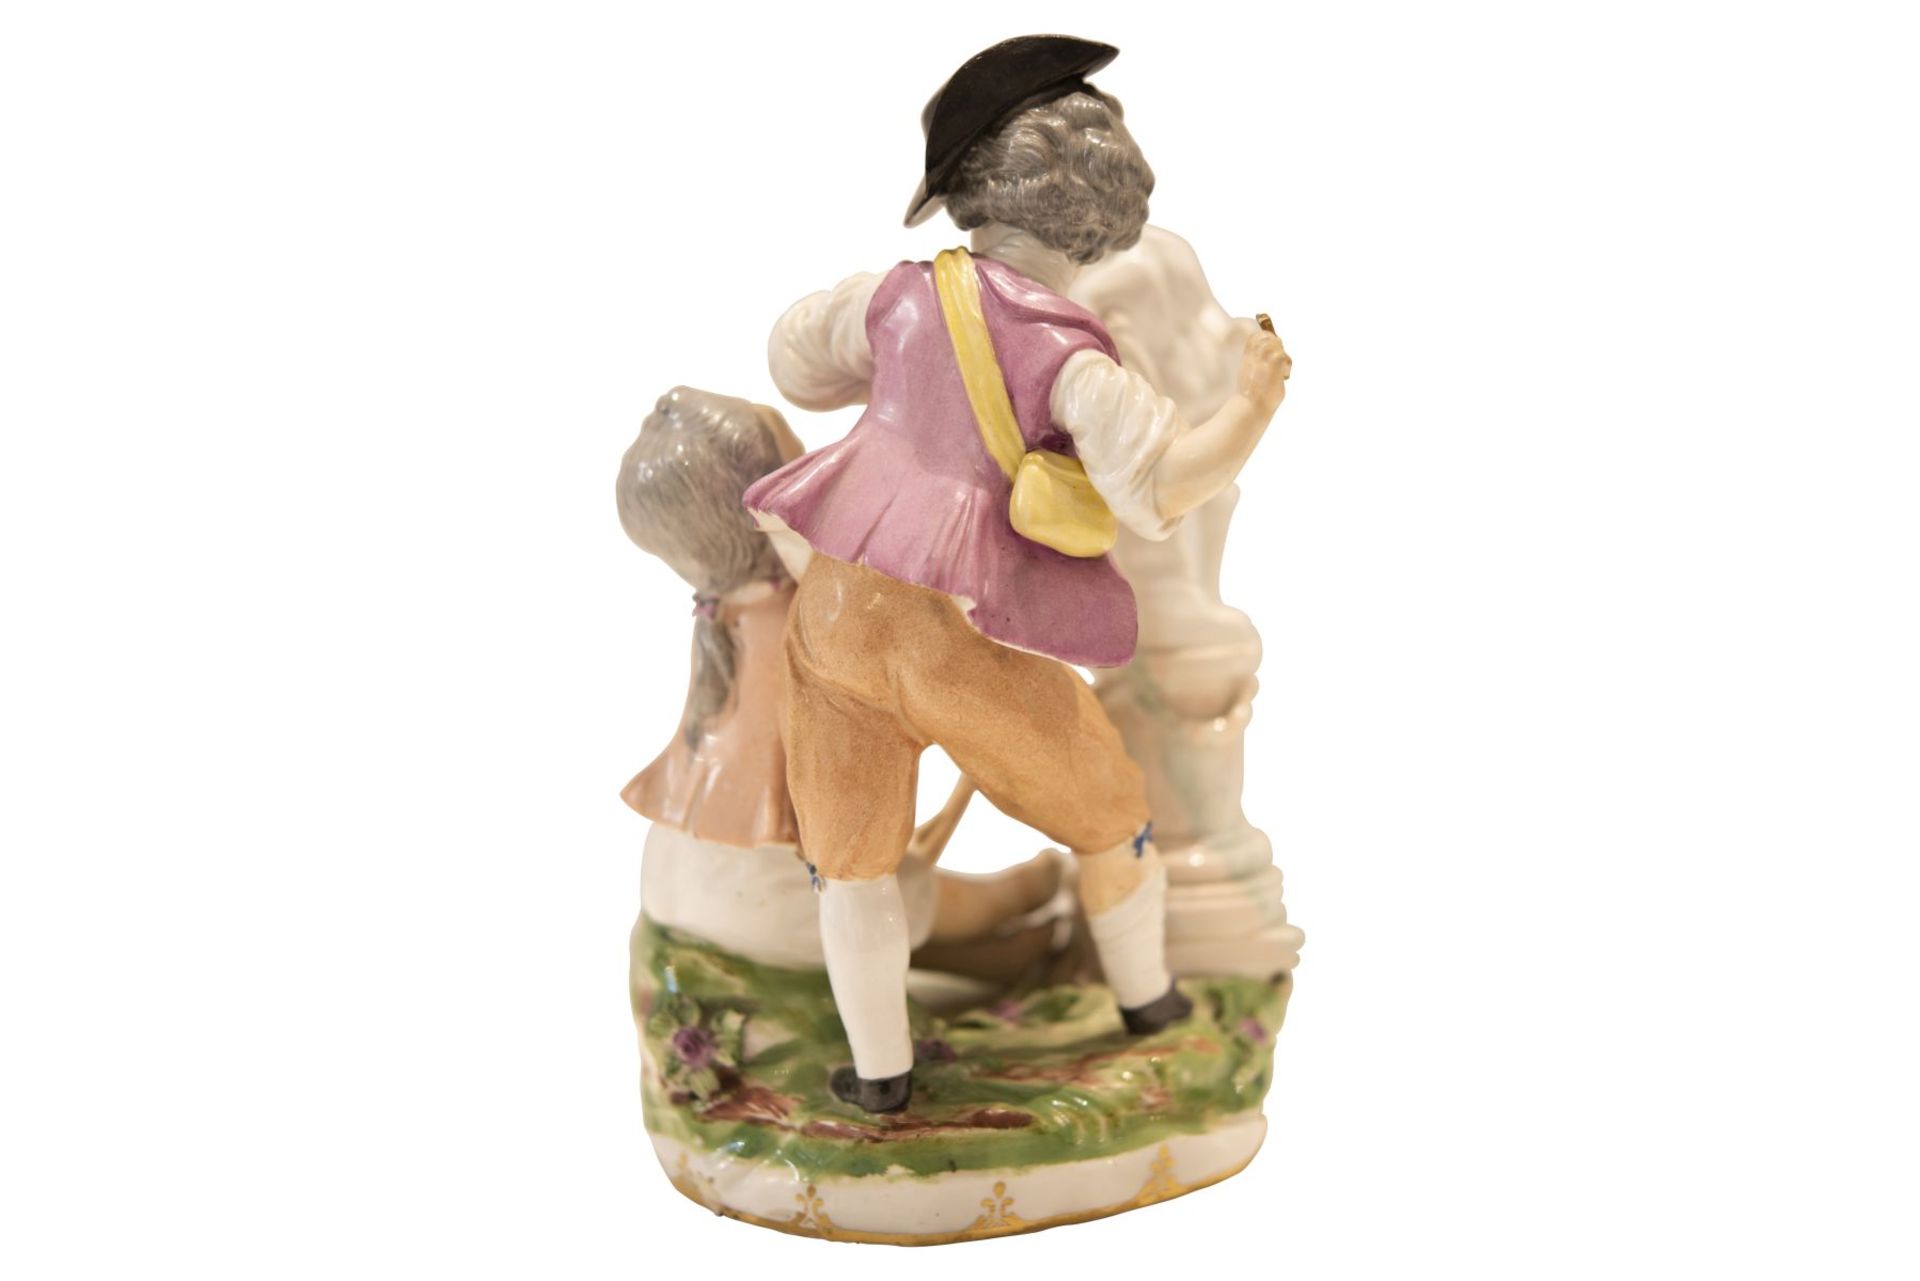 Figures group "Painters" Viennese Porcelain Manufacture 18th century - Image 3 of 6